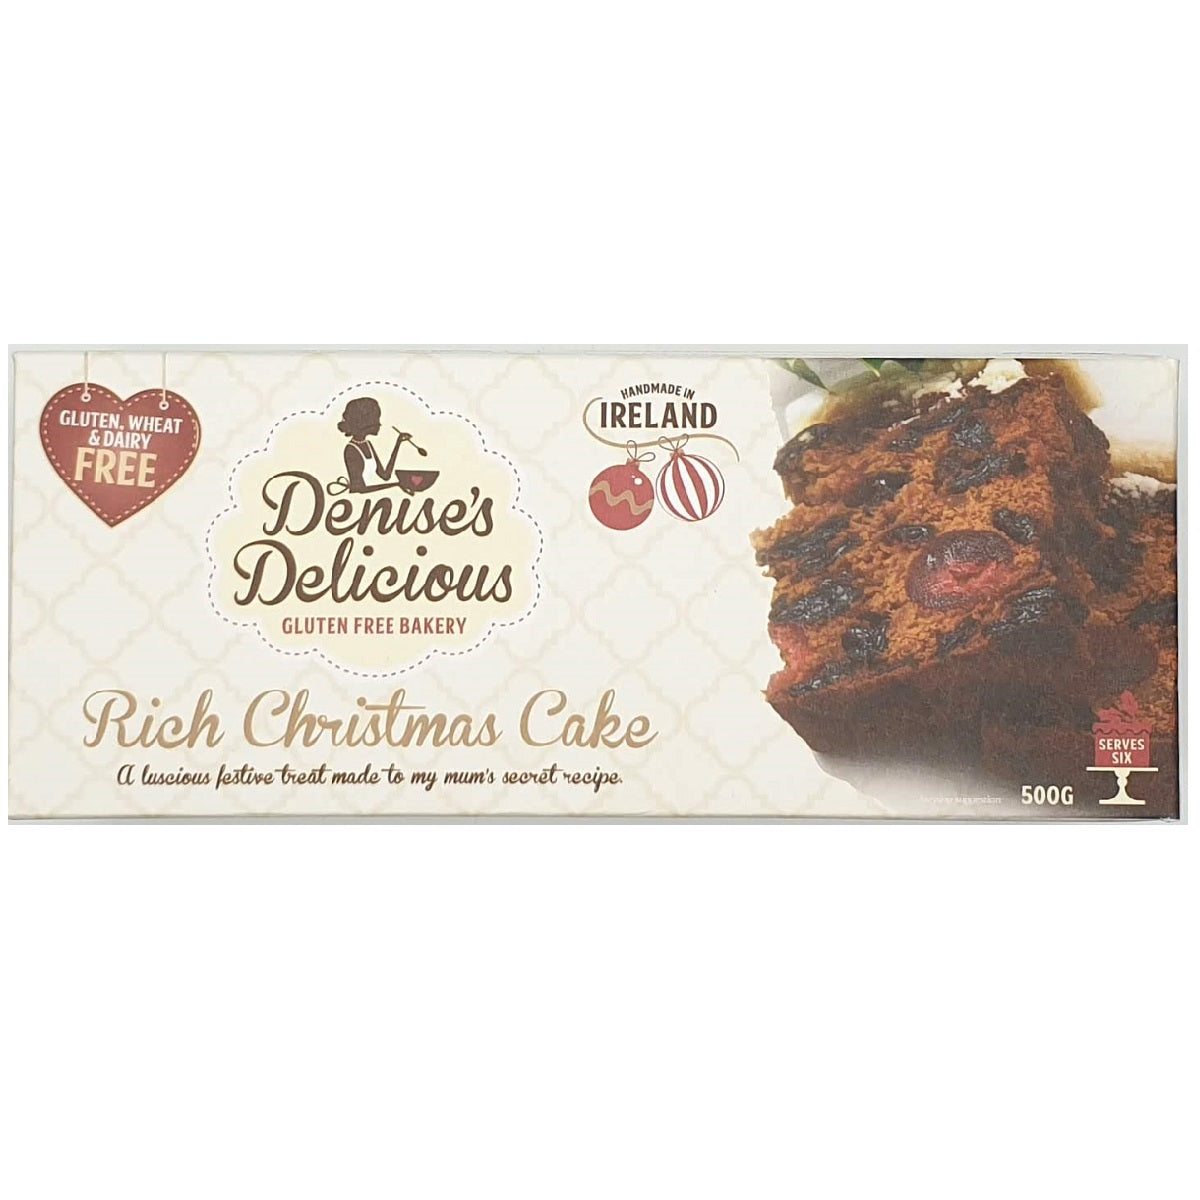 Denise’s Delicious Gluten Free Bakery Rich Christmas Cake 500g